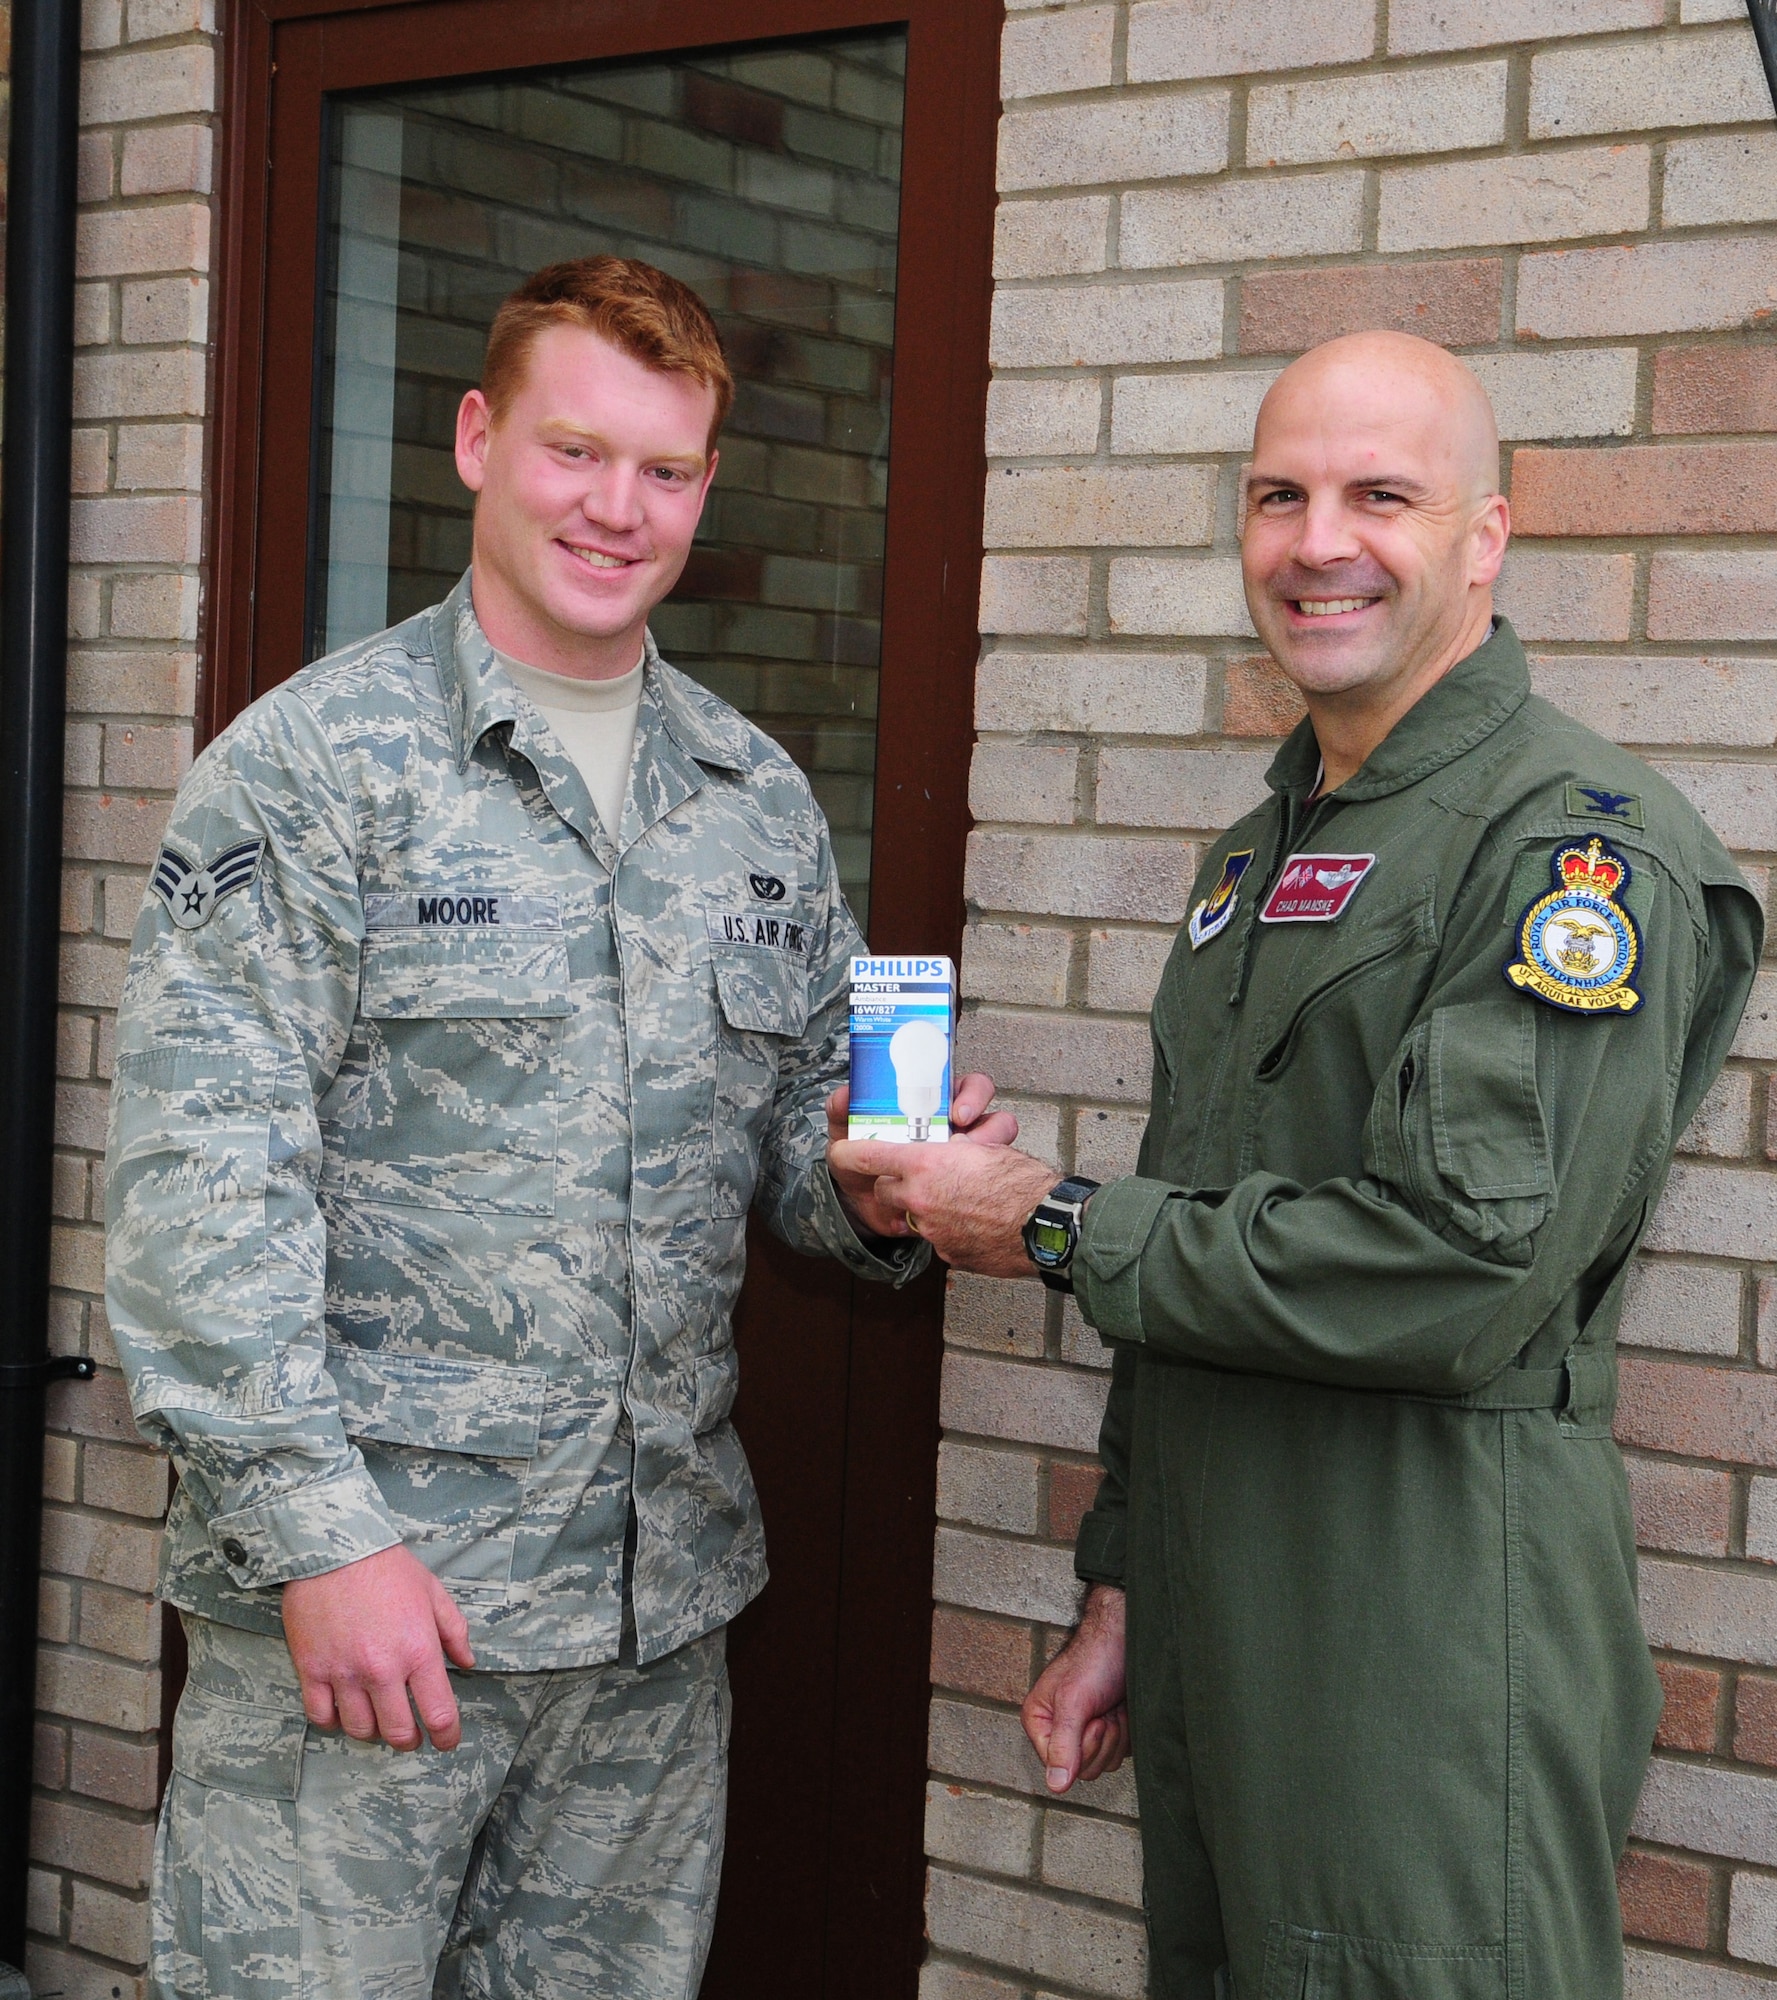 RAF MILDENHALL, England -- Col. Chad Manske, 100th Air Refueling Wing commander, presents Senior Airman Richard Moore, 100th Civil Engineer Squadron, with an energy efficient lightbulb Oct. 15, as part of Energy Awareness Month. To encourage energy conservation, the 100th CES is providing a free lightbulb to military members living in on-base housing. To show his support of this, Colonel Manske visited RAF Mildenhall housing and helped give out some of the energy-efficient lightbulbs. (U.S. Air Force photo/Karen Abeyasekere)